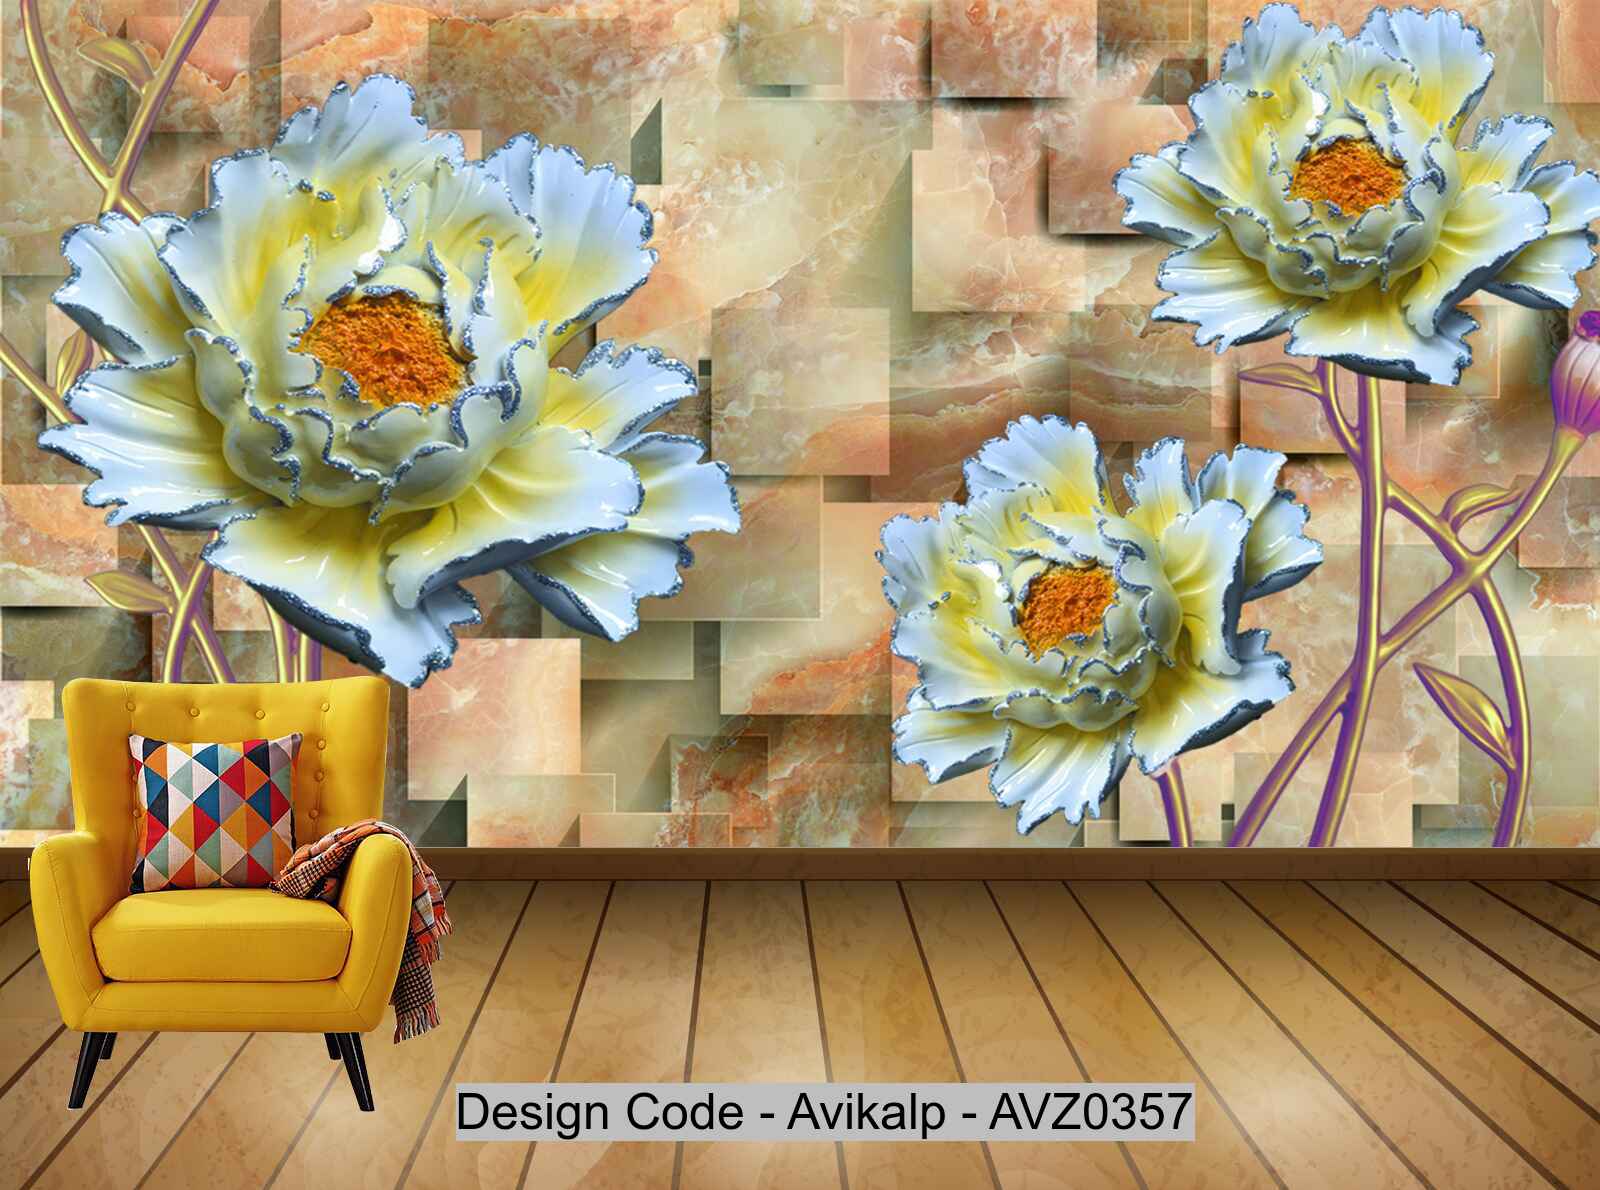 Avikalp Exclusive AVZ0357 Jade Carving Daisy 3D Relief Embossed Background Wall HD 3D Wallpaper